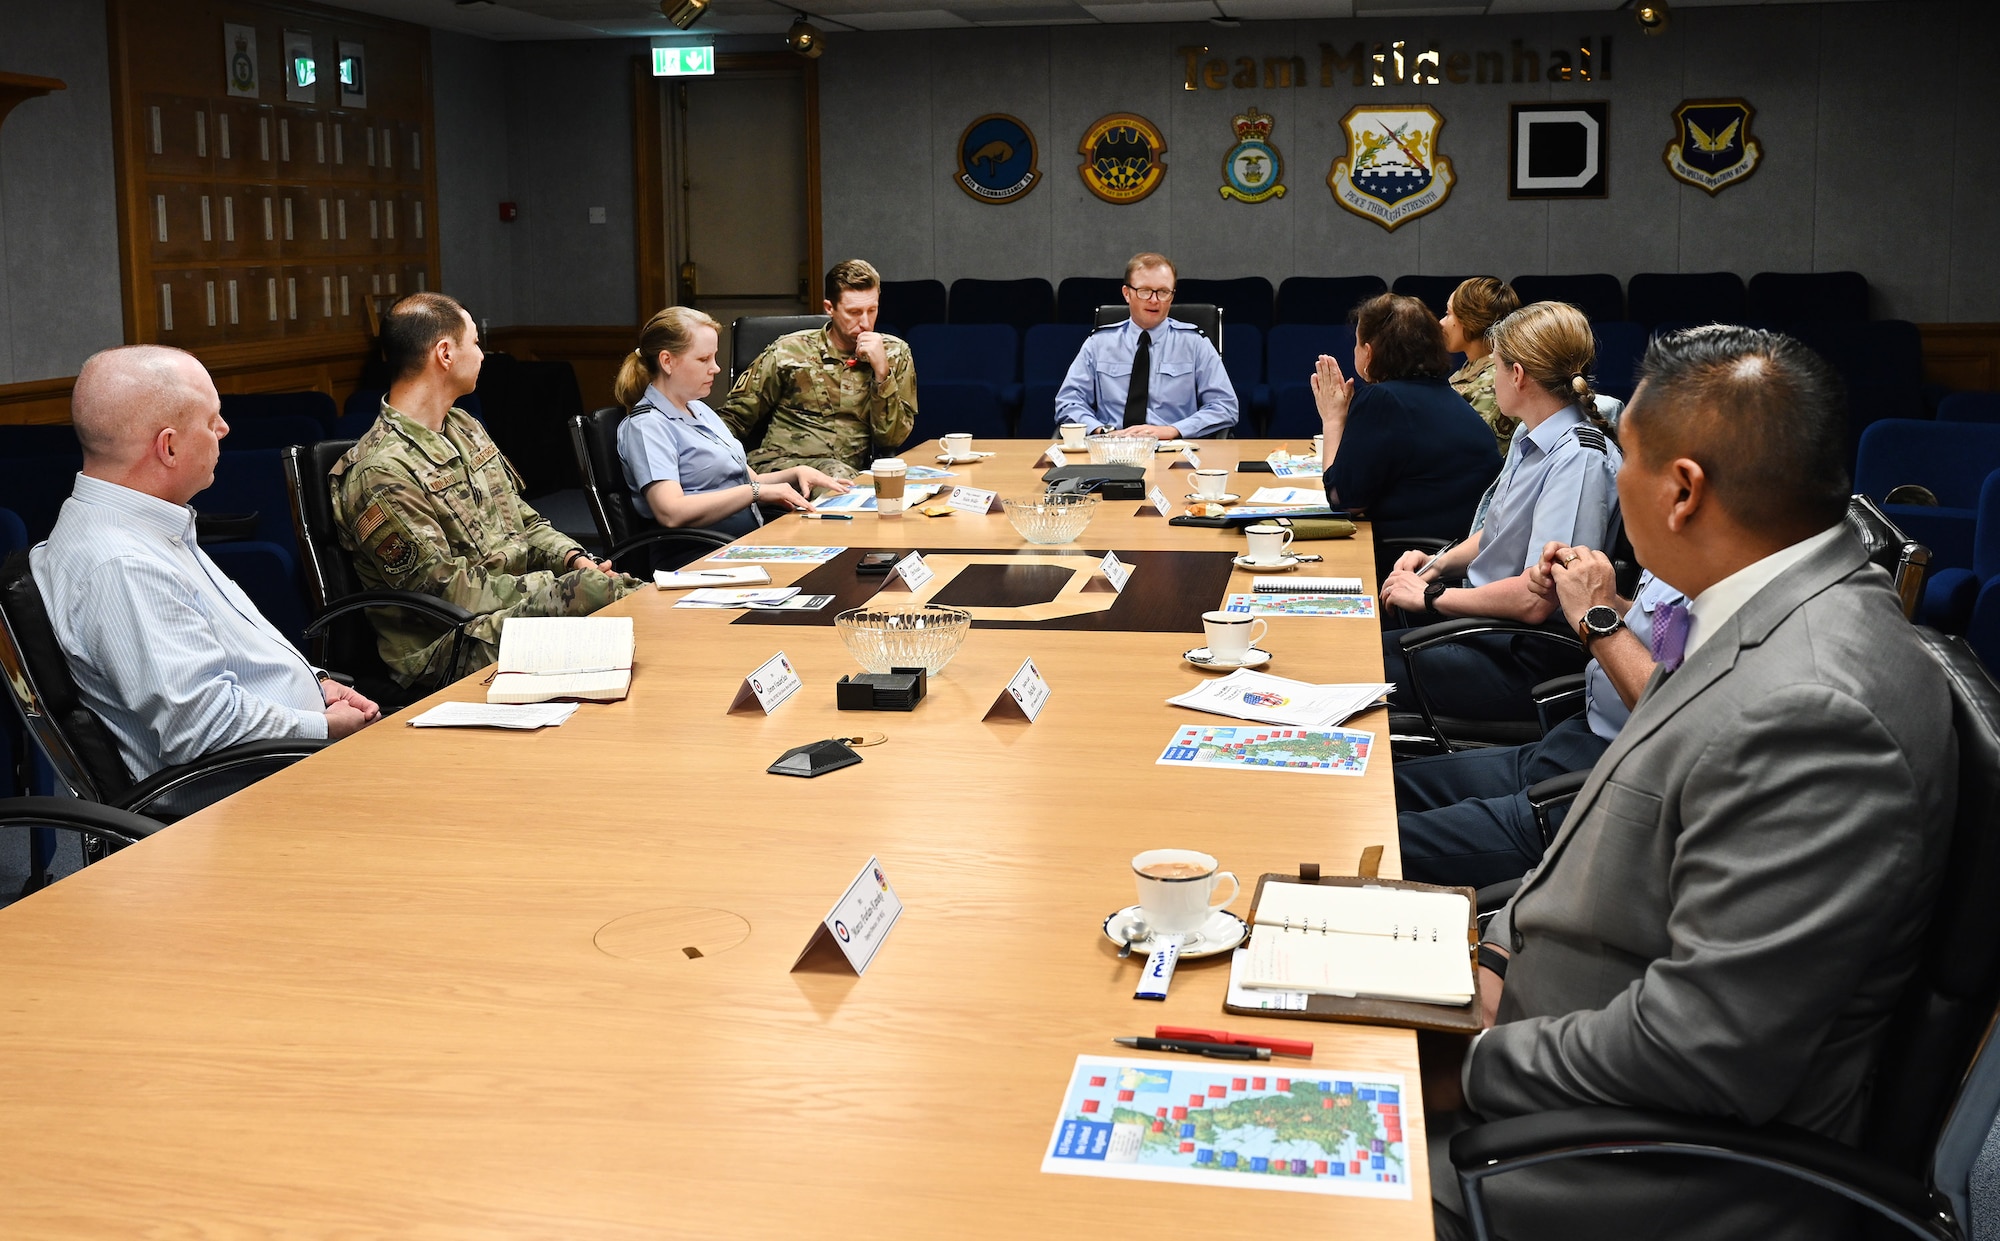 Air Commodore Simon Strasdin, center, Royal Air Force Intelligence, Surveillance, Target Acquisition and Reconnaissance force commander, based at RAF Waddington, meets with base leadership during a visit to RAF Mildenhall, England, Aug. 23, 2023. Strasdin was here to strengthen United Kingdom-US relationships and thank 100th ARW, 95th Reconnaissance Squadron and 488th Intelligence Squdron Airmen for their hard work and cooperation in the joint partnership program between the RAF and U.S. Air Force reconnaissance aircraft. (U.S. Air Force photo by Karen Abeyasekere)